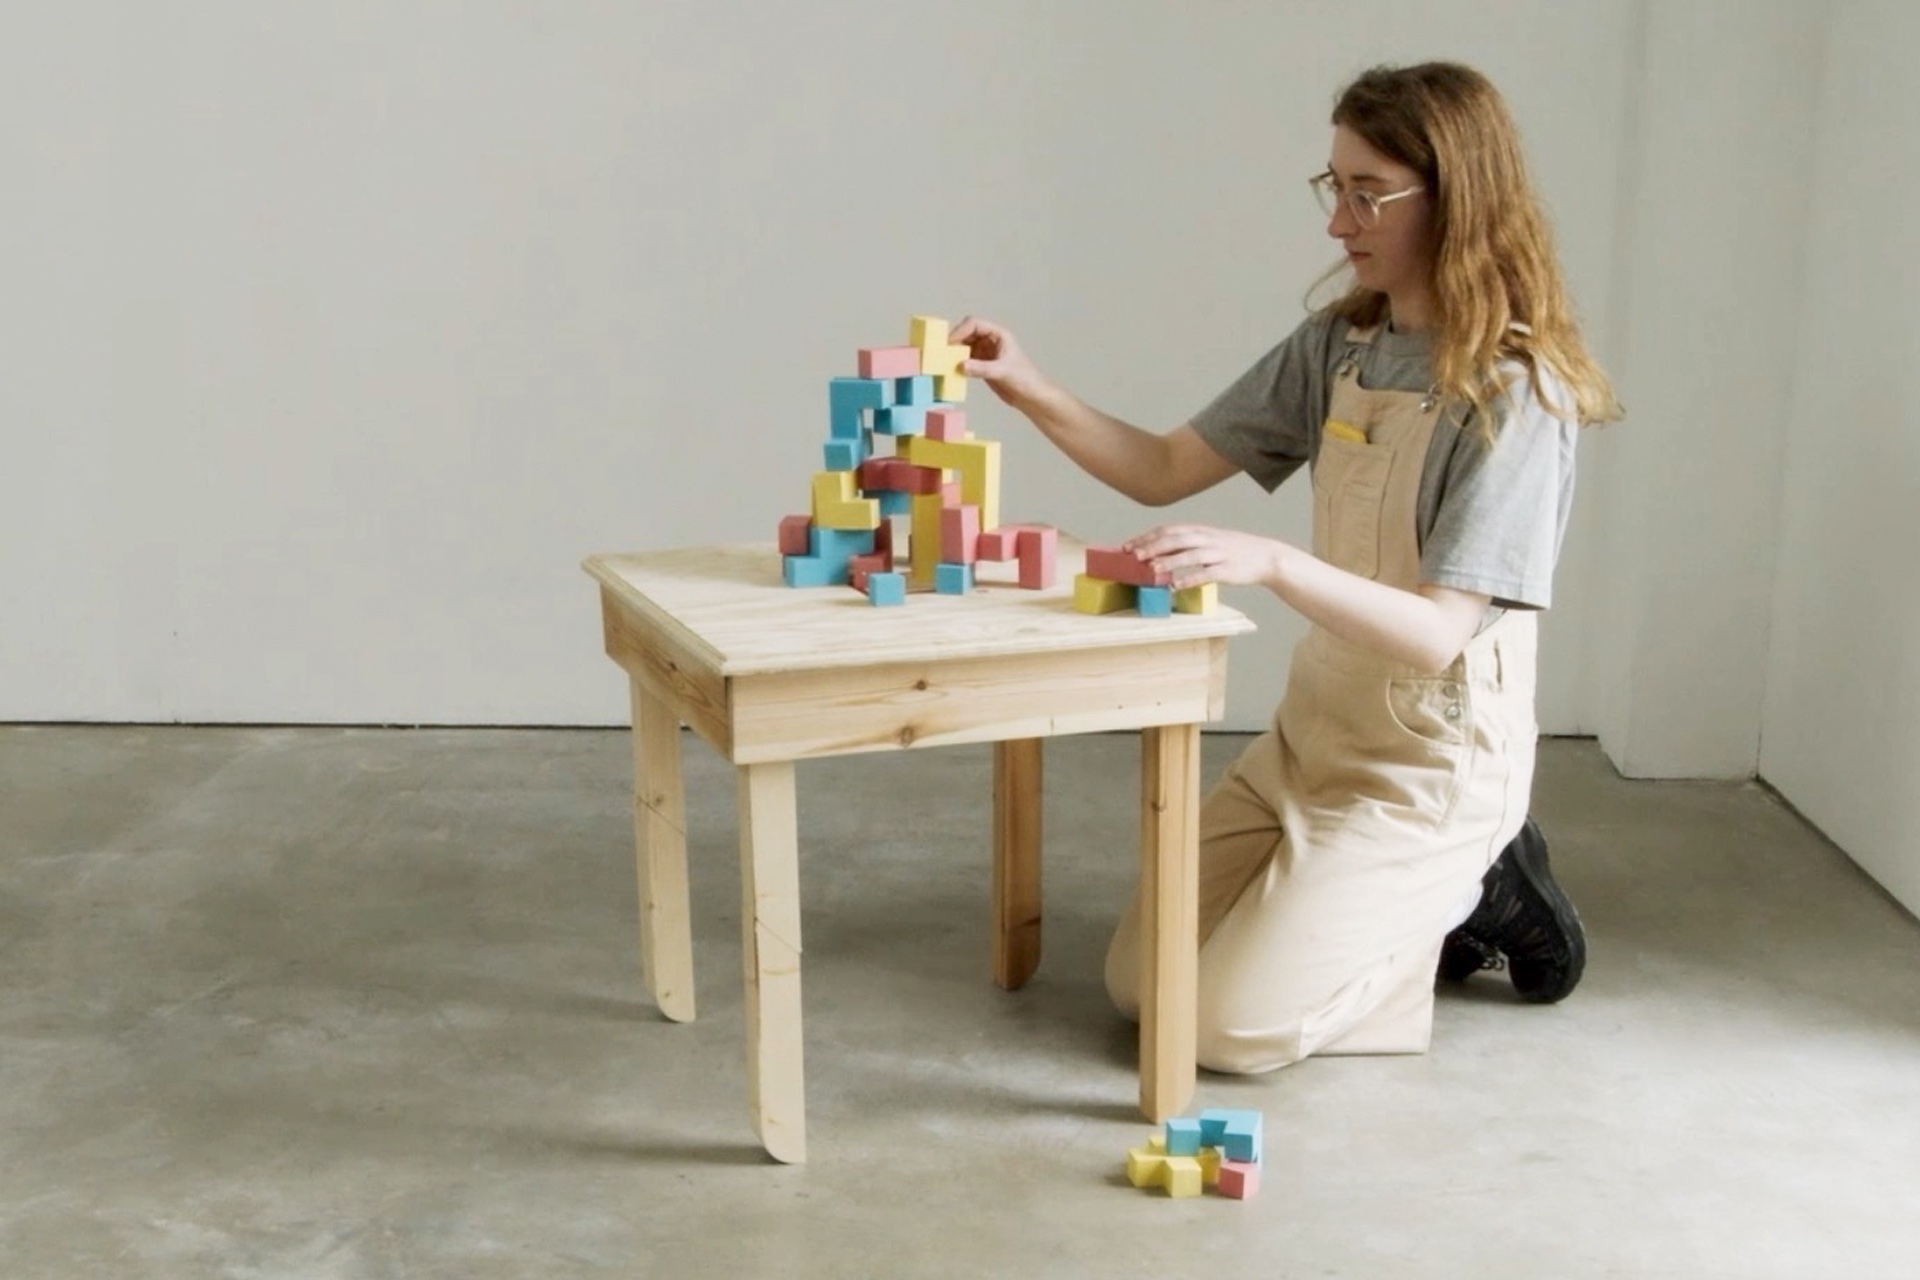 A woman kneels beside a small, wooden table. She builds a tower on top of it out of wooden bricks painted pastel pink, blue and yellow.